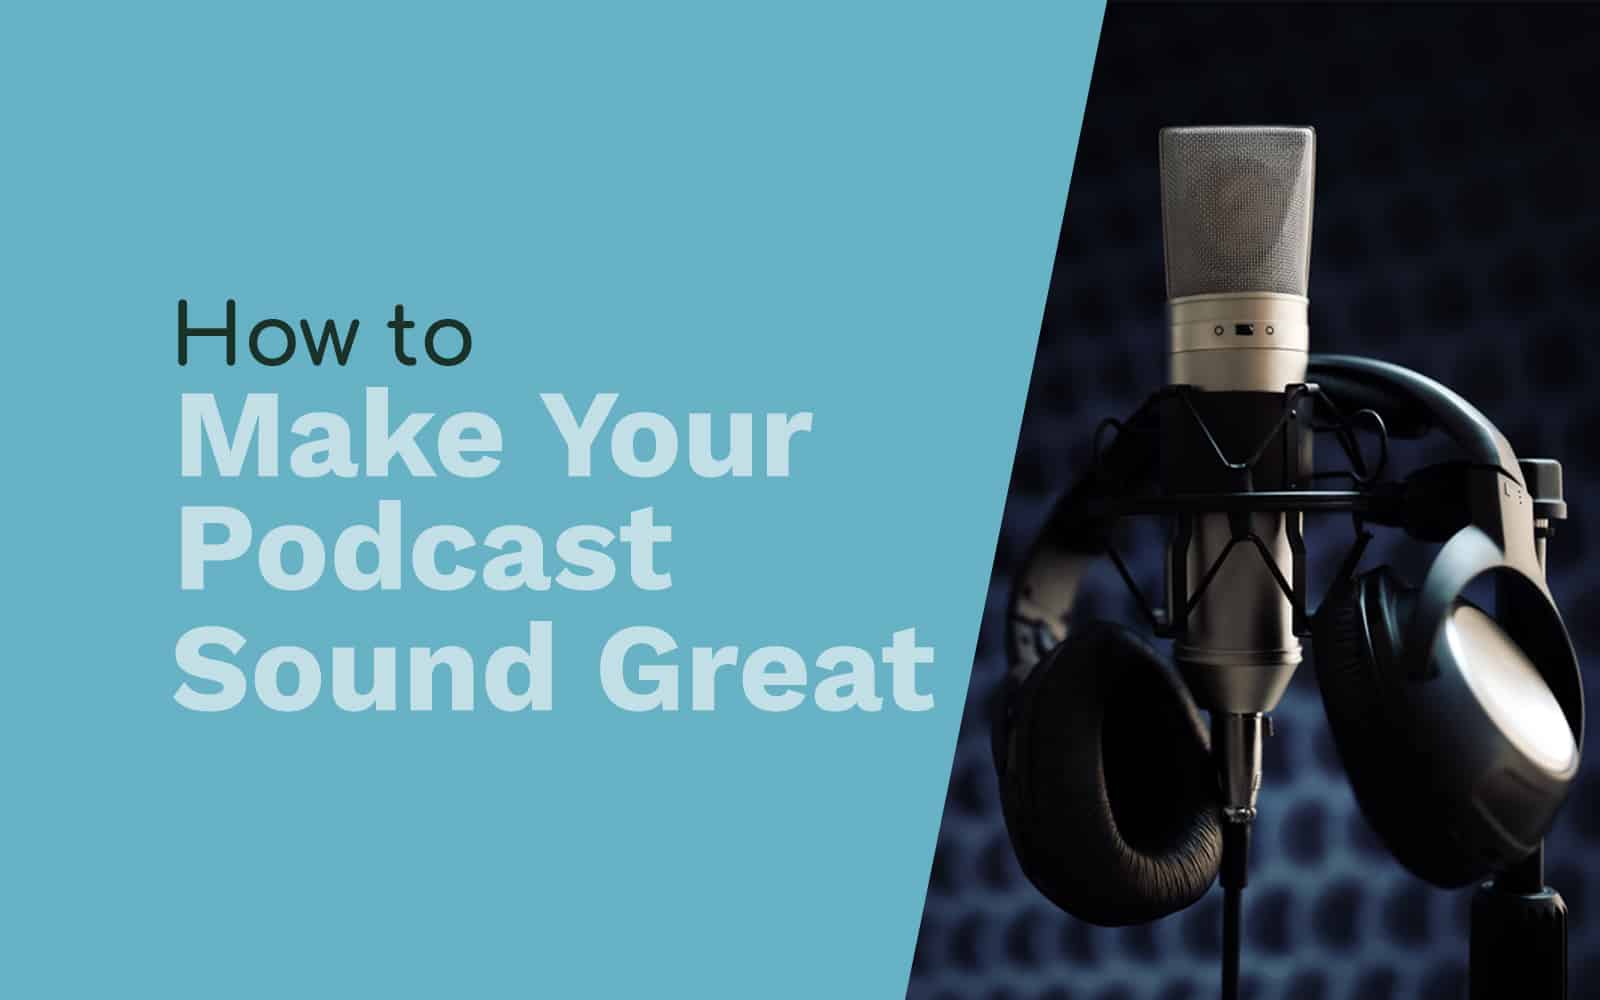 How to Make Your Podcast Sound Great Audio Quality podcast sound Music Radio Creative